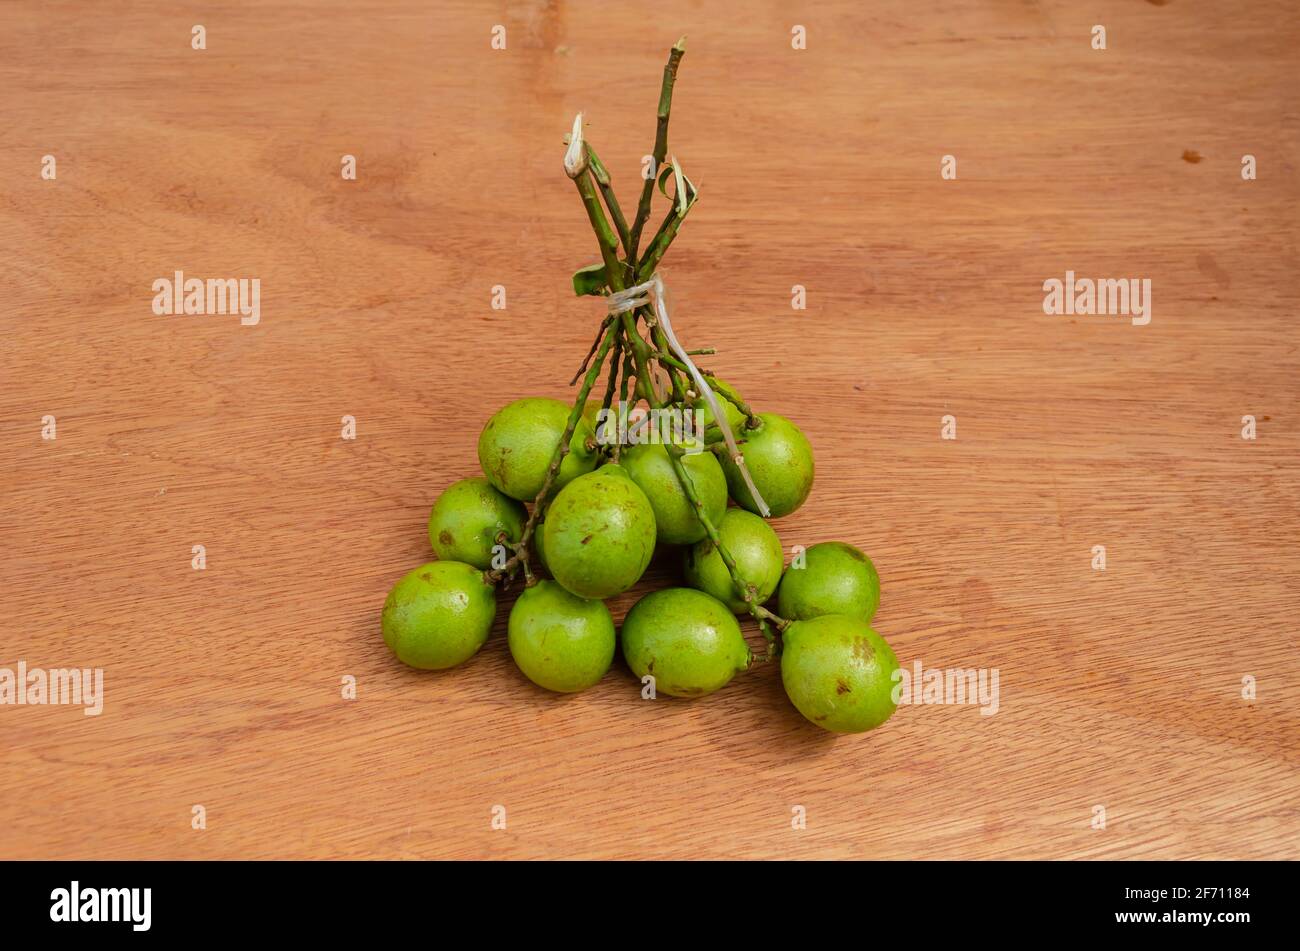 Guineps on Stem Tied Together Stock Photo